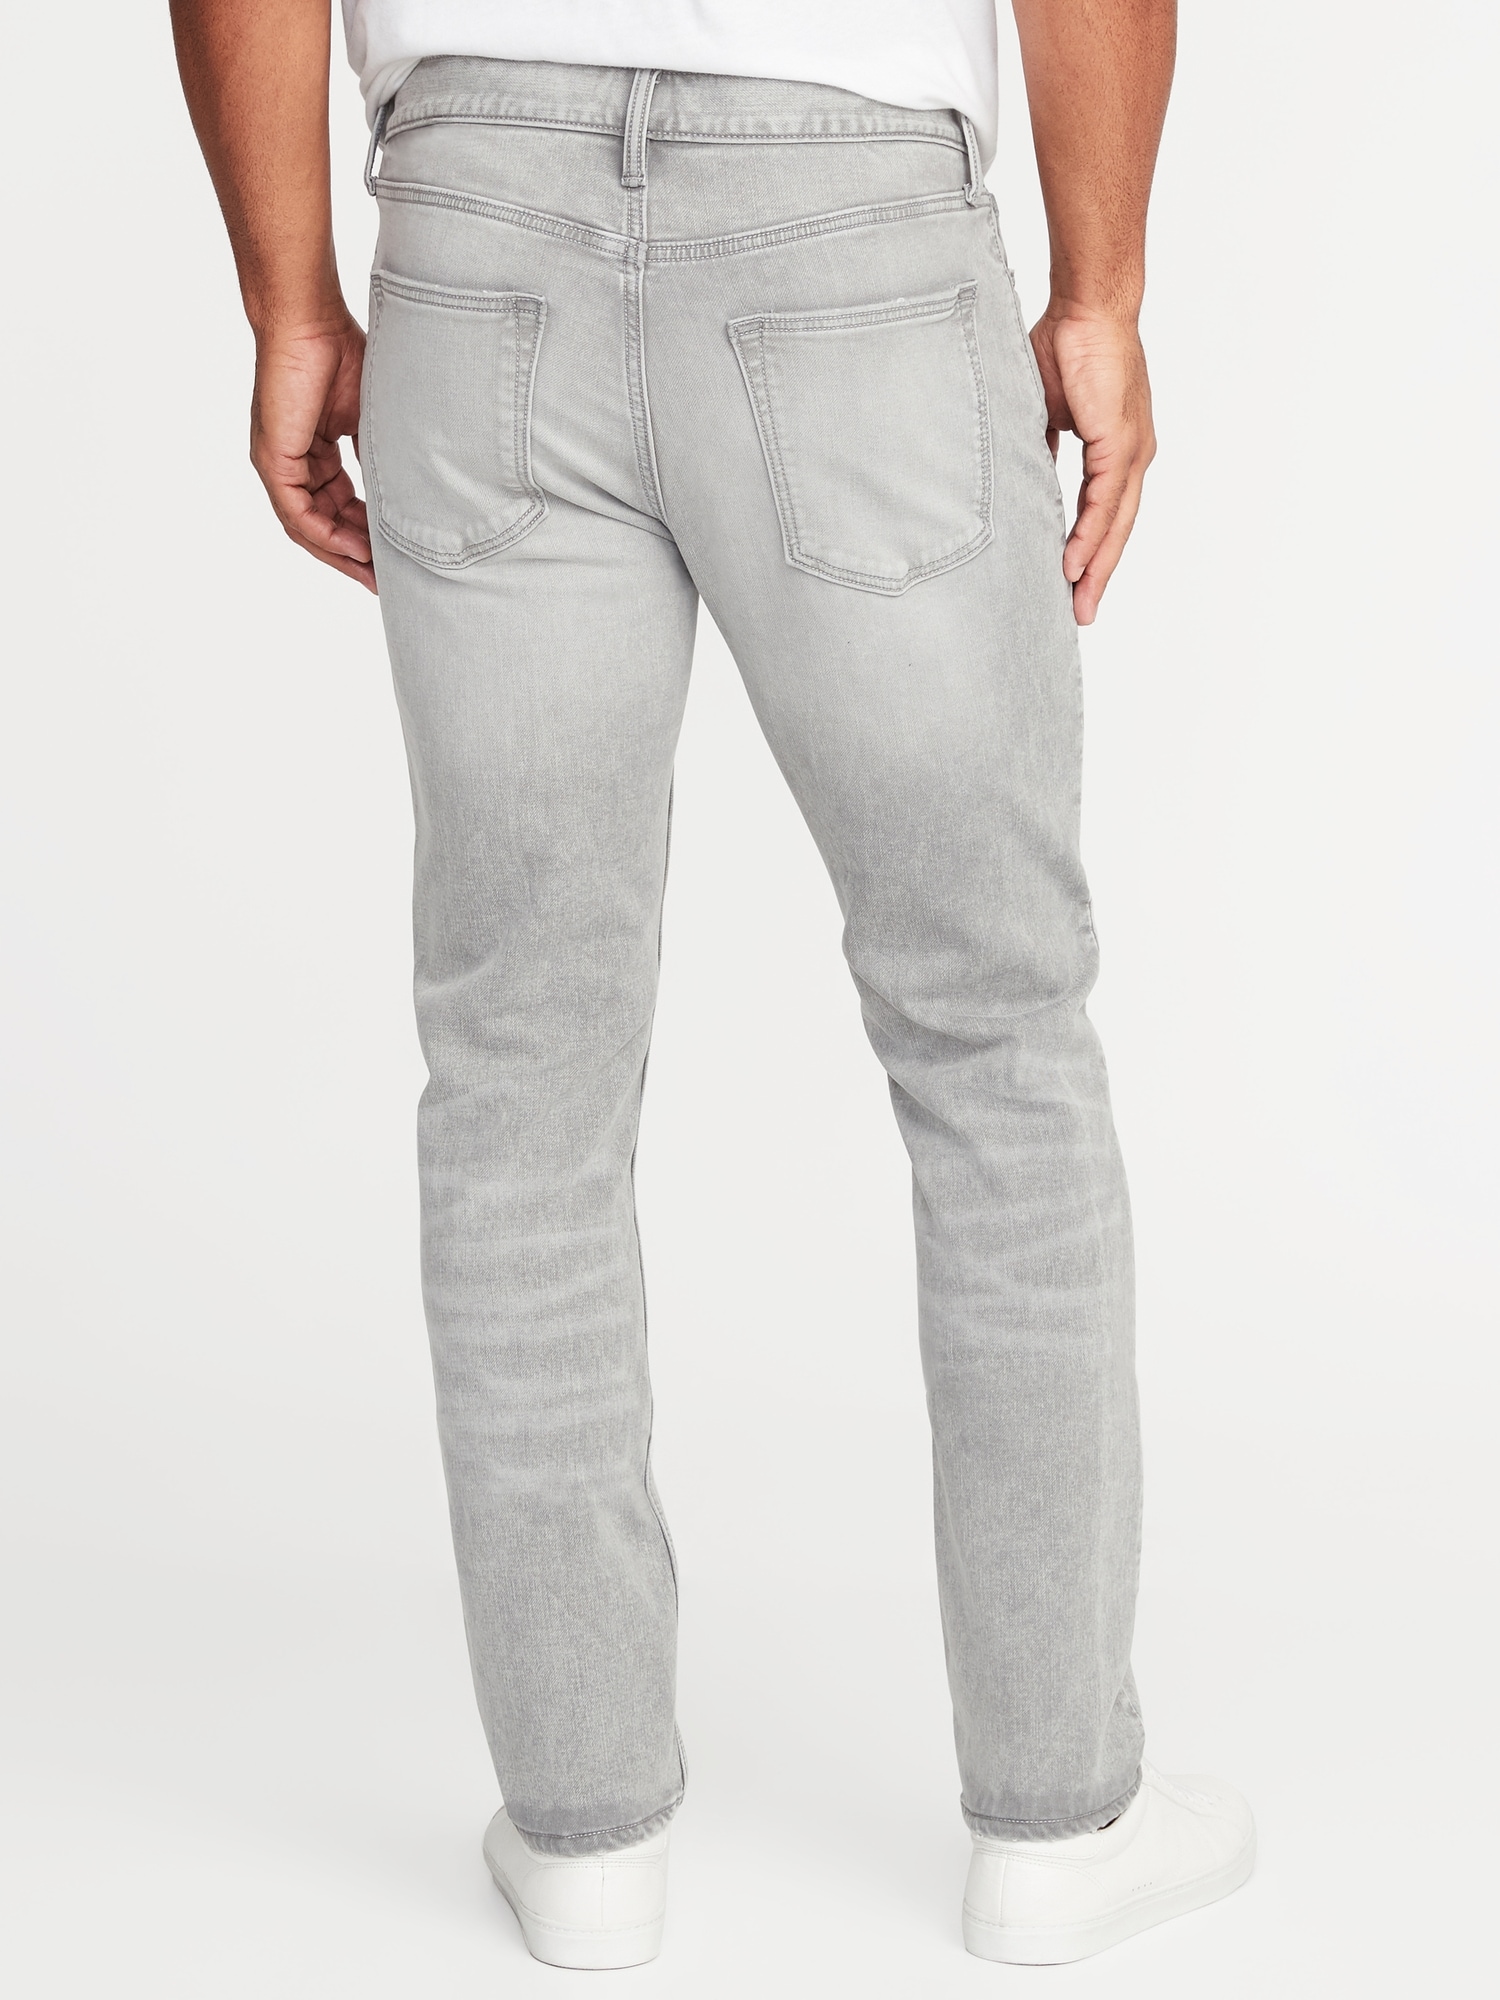 gray jeans old navy